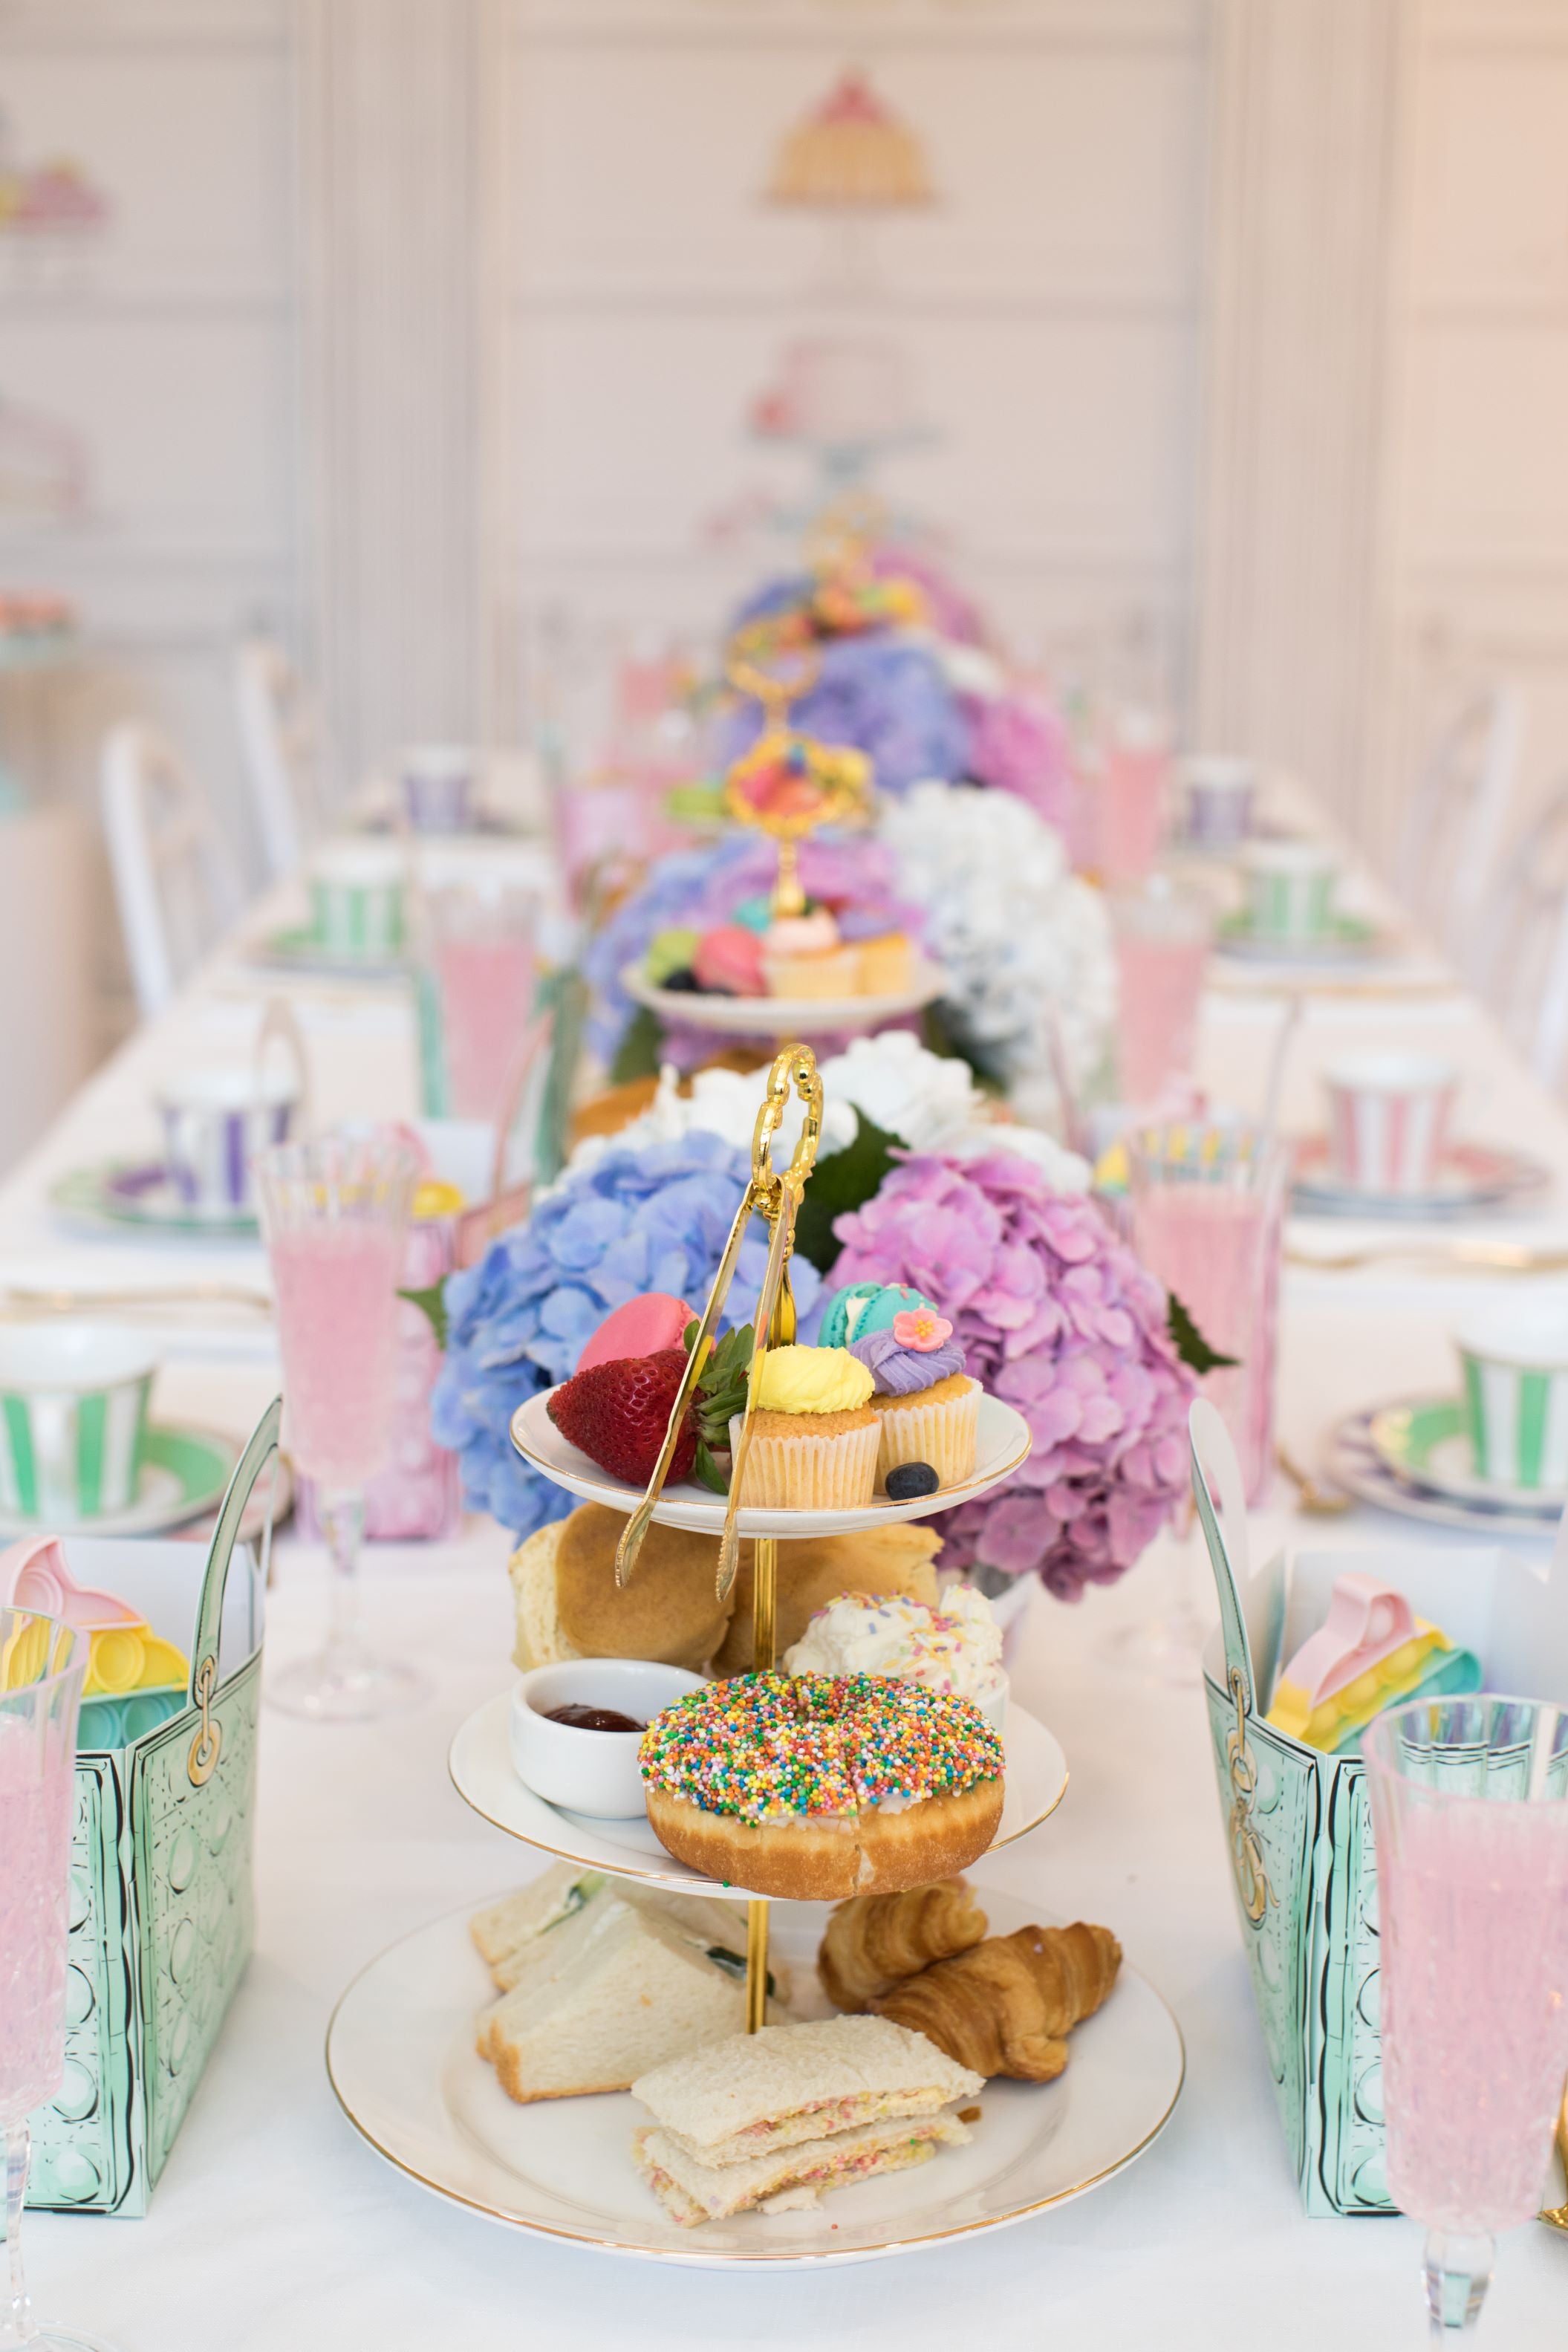 Le Ultimate High Tea and Spa Baby shower